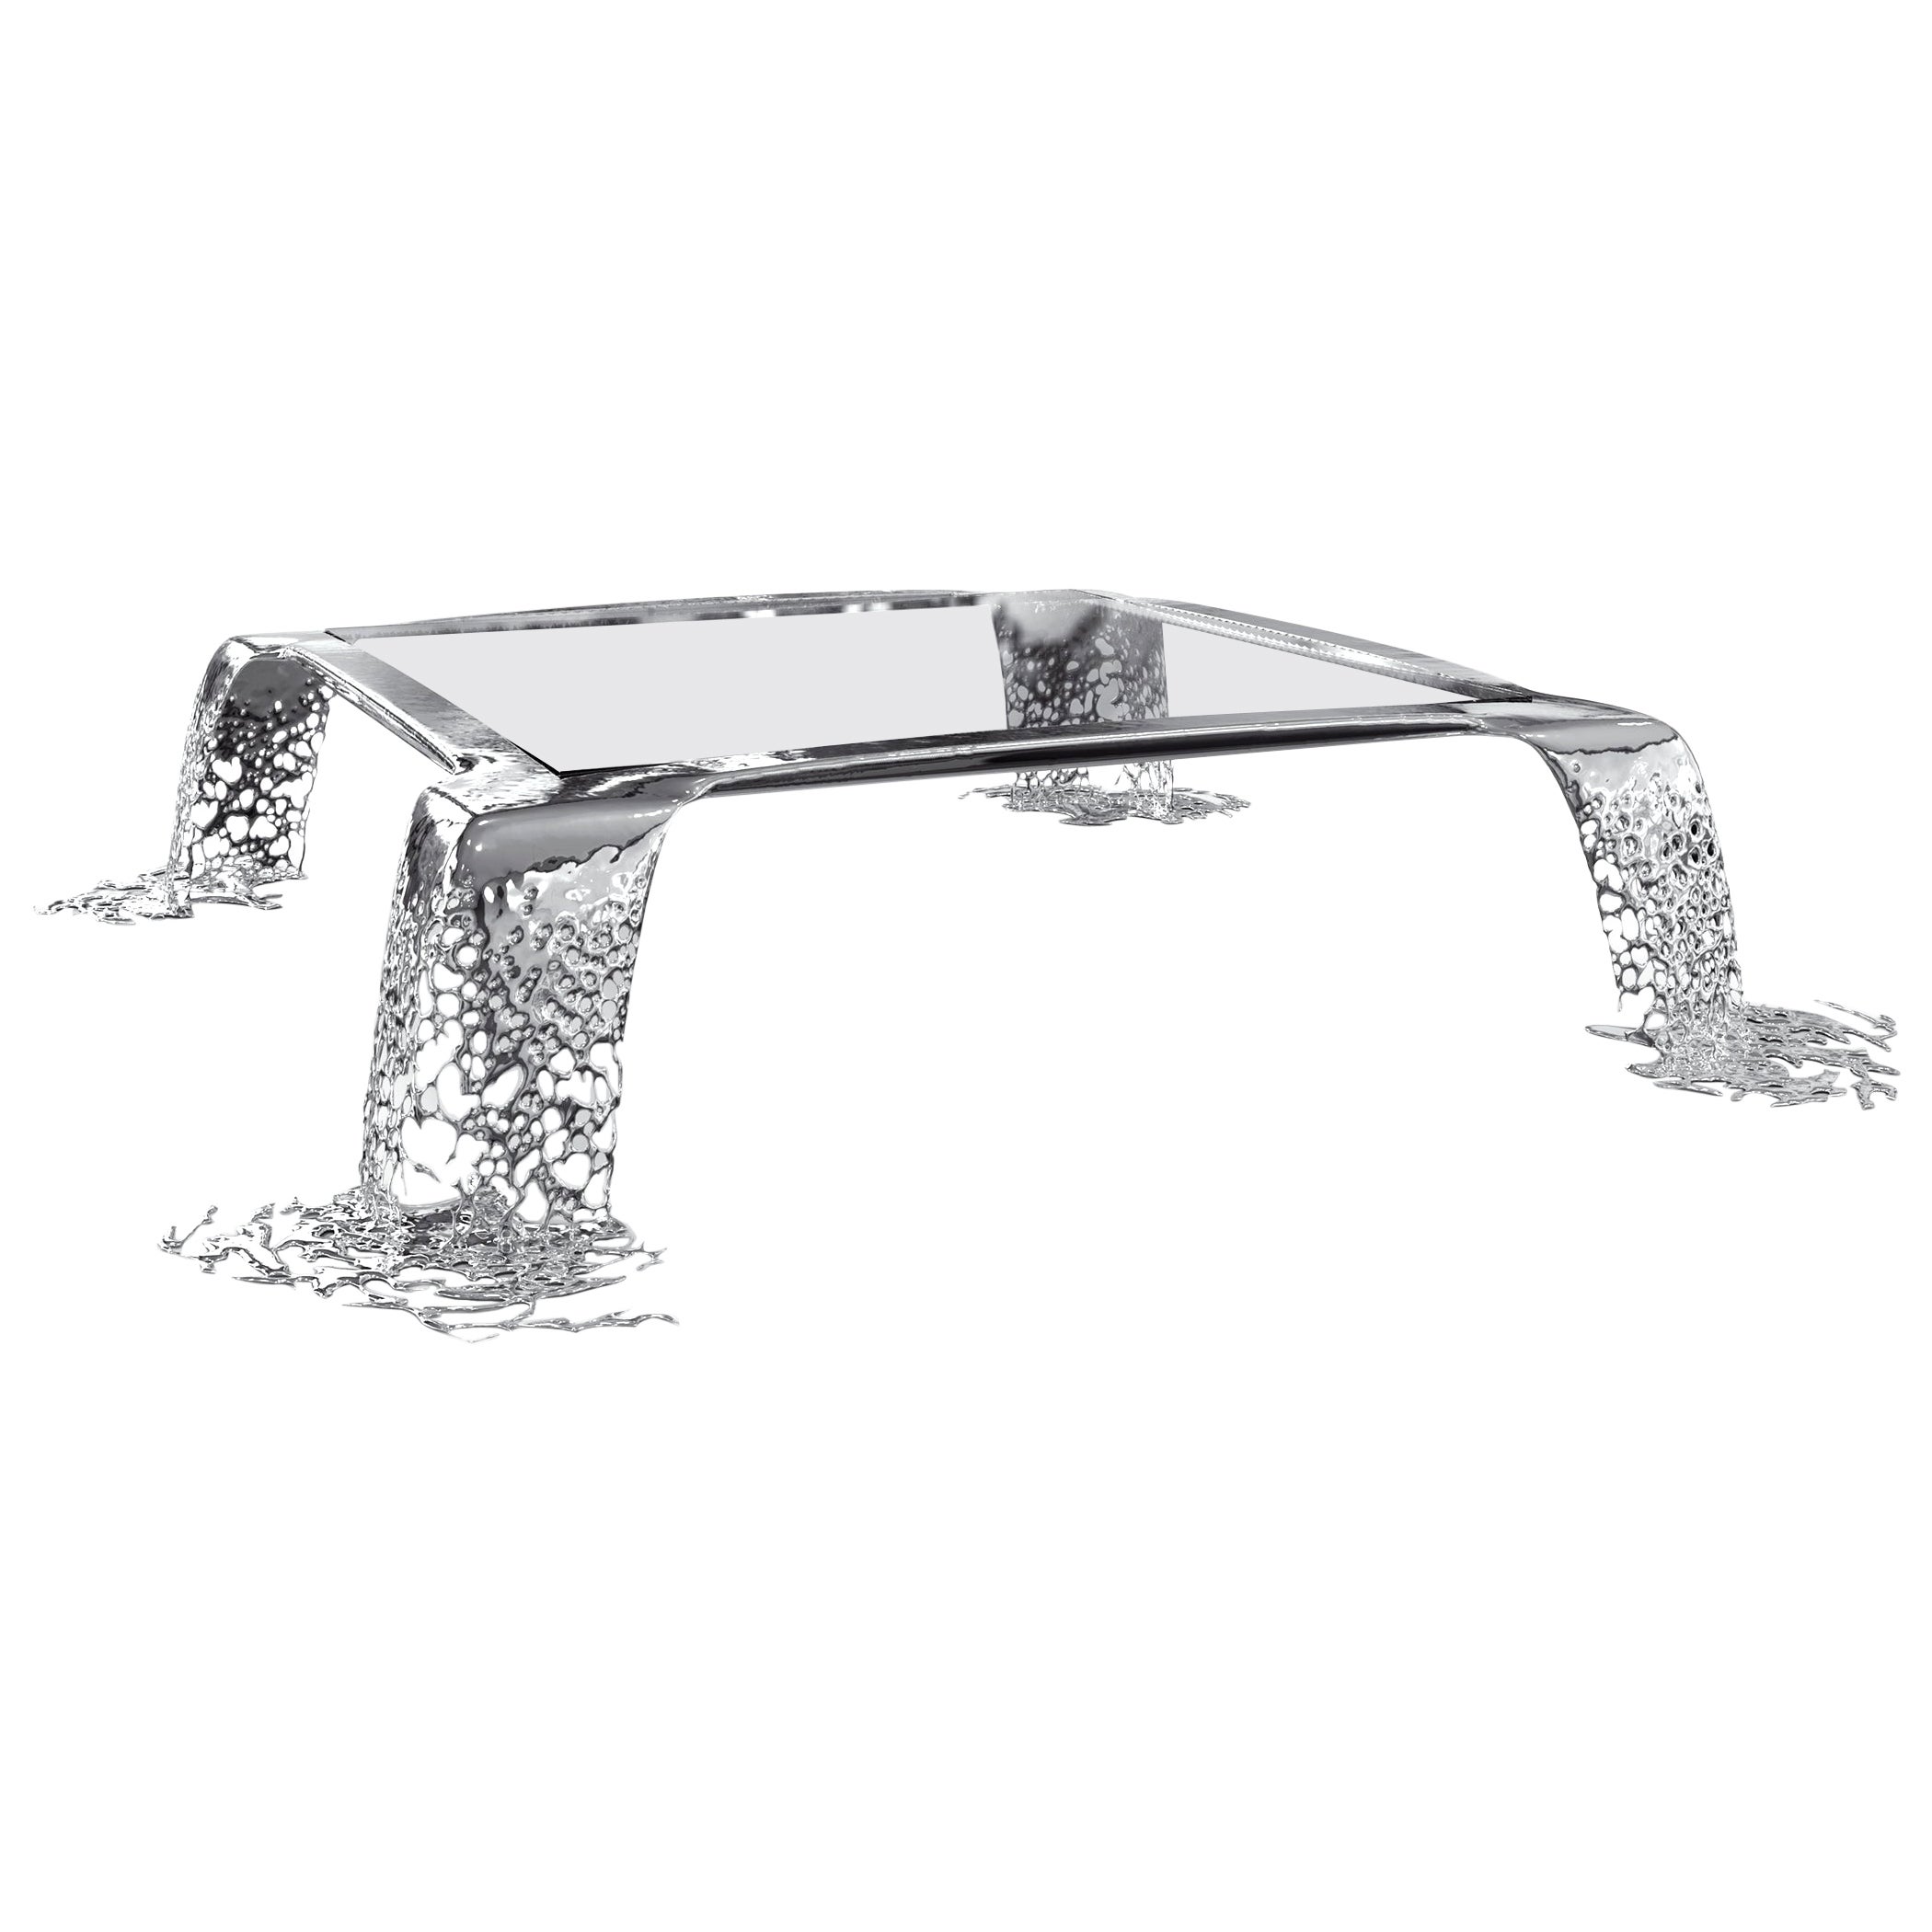 Cascatta Stainless Steel Mirror Polish Square Dining Table